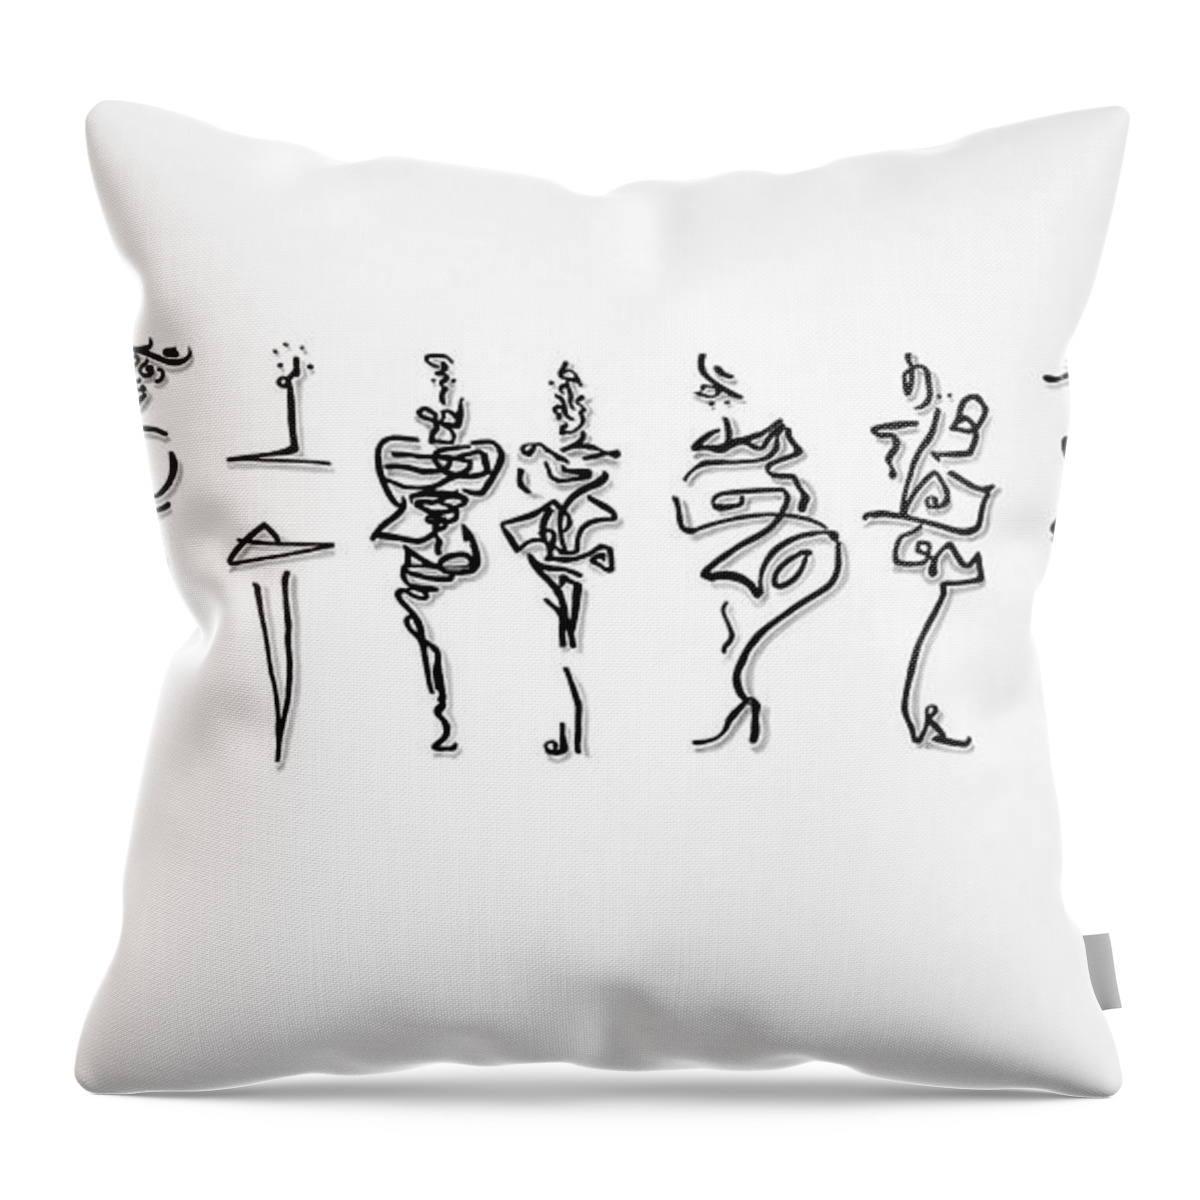  Throw Pillow featuring the drawing Runway Ladies by James Lanigan Thompson MFA